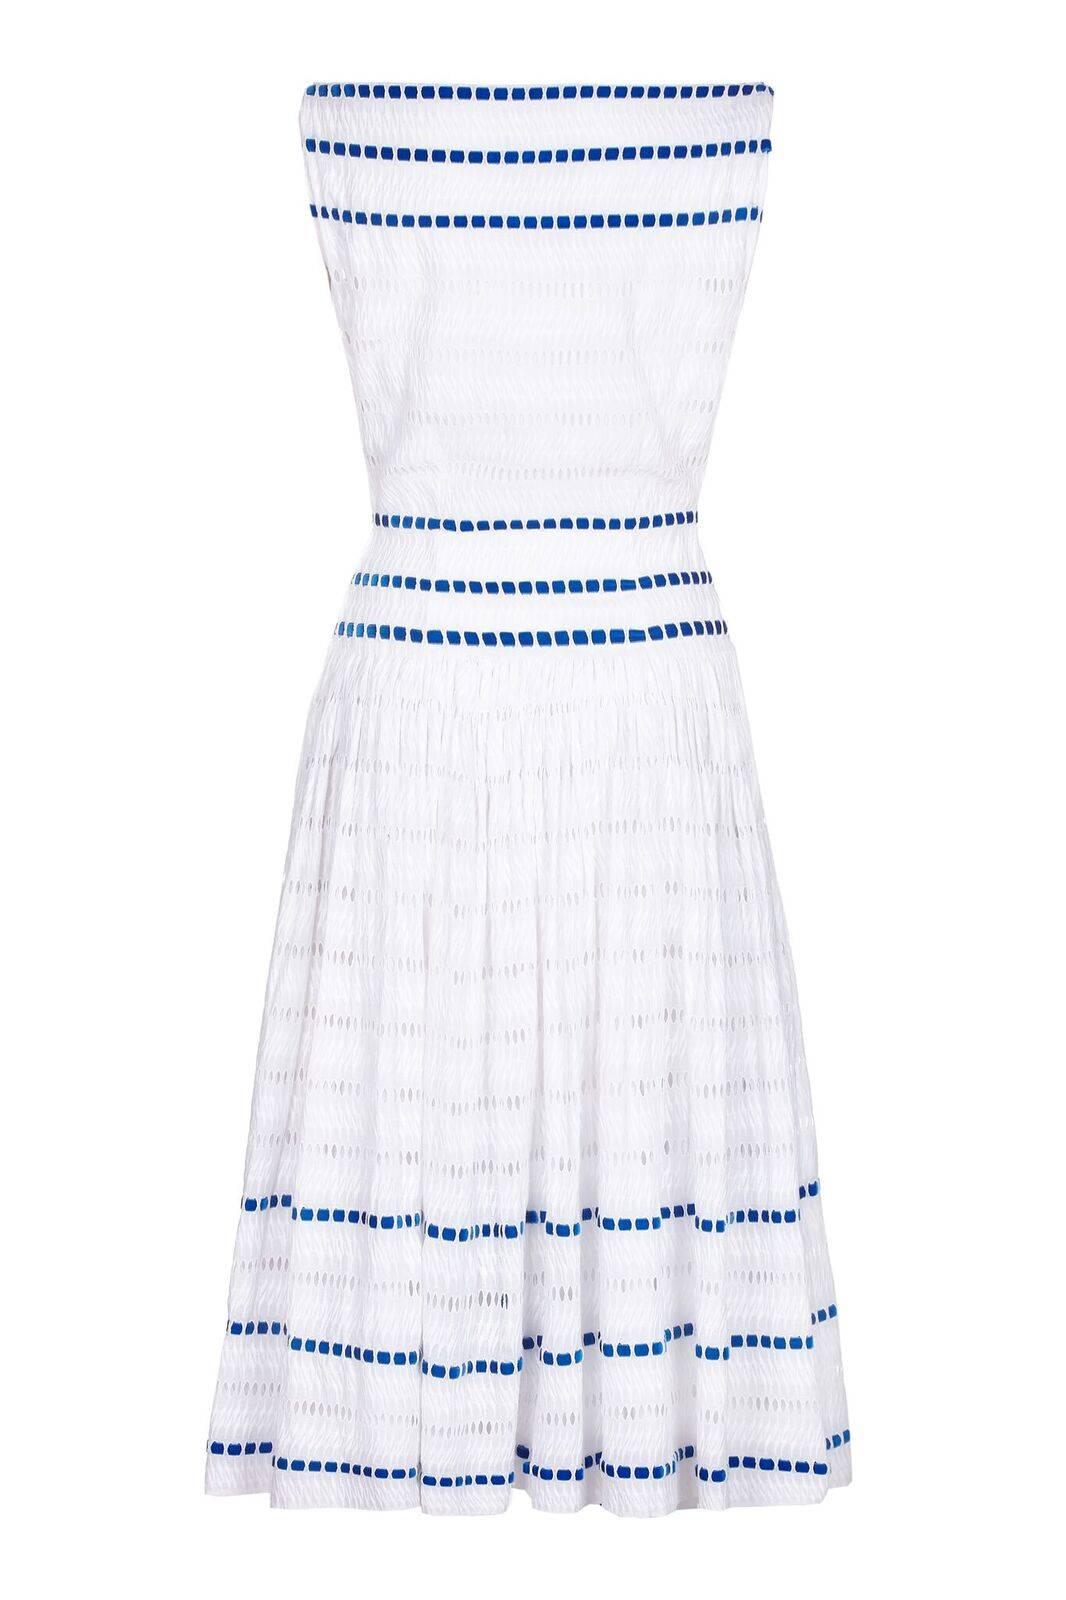 This enchanting vintage 1950s white broderie anglaise dress with blue velvet ribbon work is a beautiful fit for an hourglass figure. The slash neckline perfectly balances the ankle length skirt which flares out from the hip into soft pleats. Neat